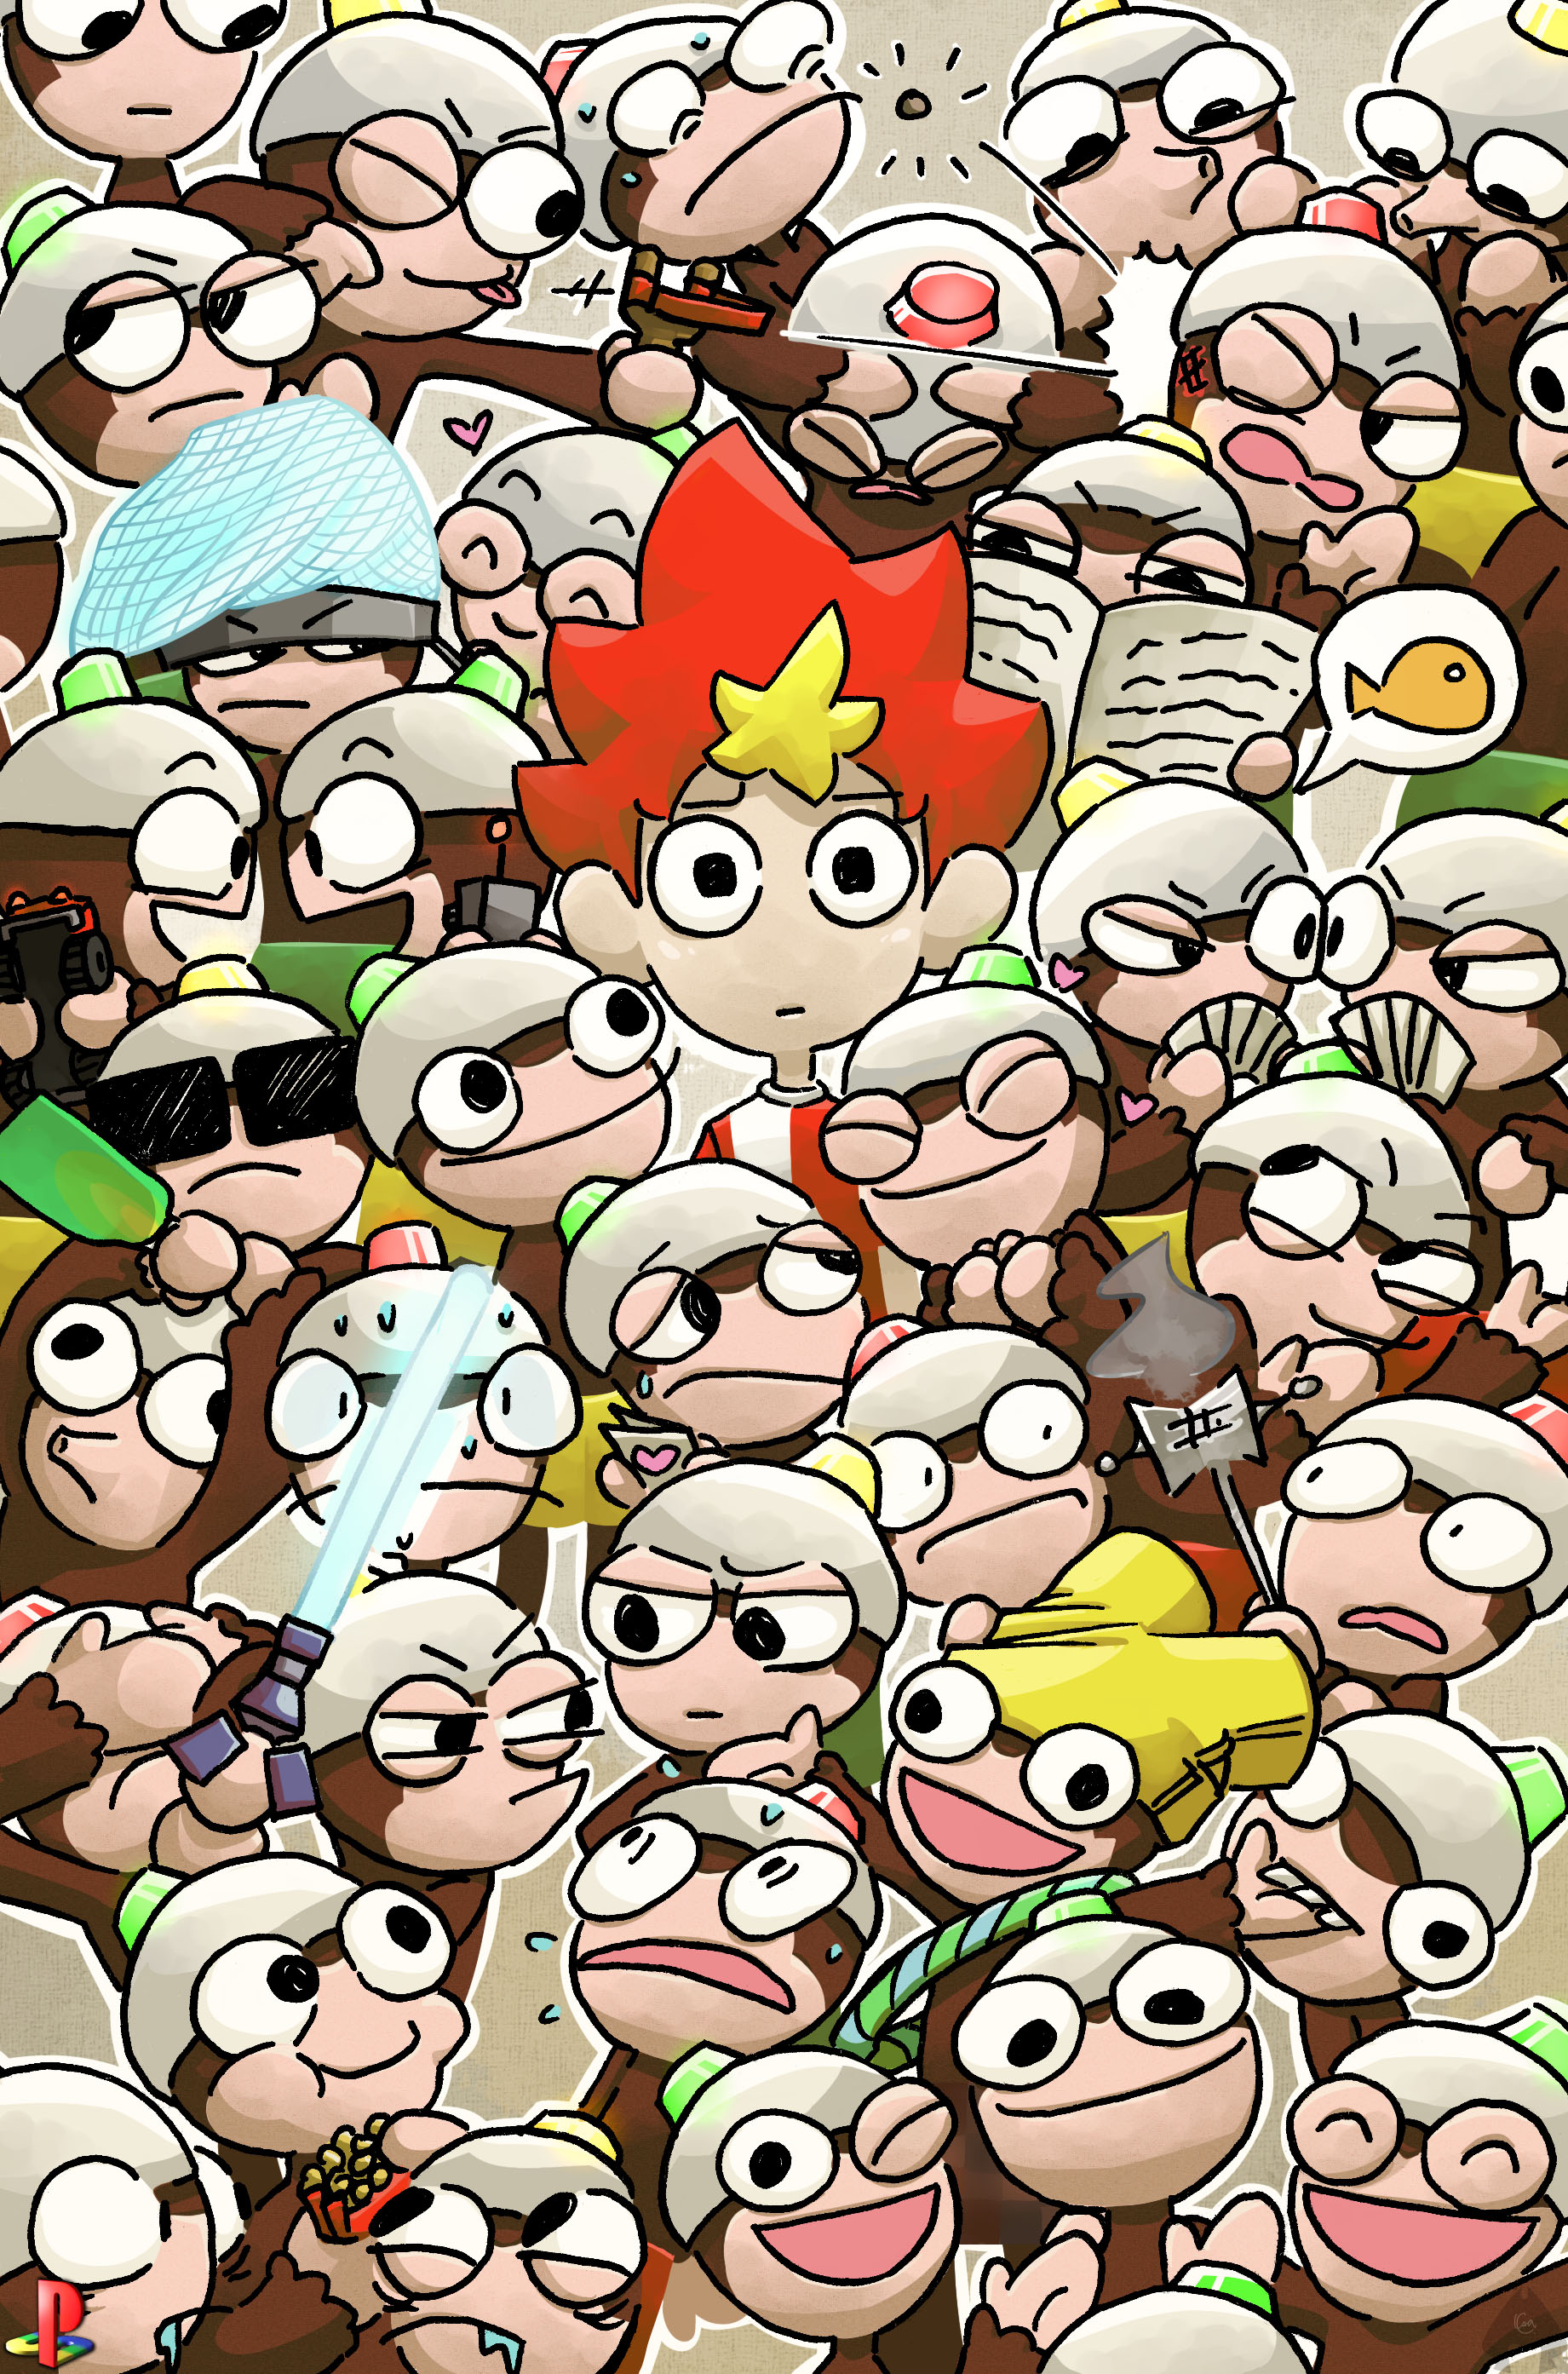 Ape Escape Playstation Anniversary Tribute on Game-Art-HQ